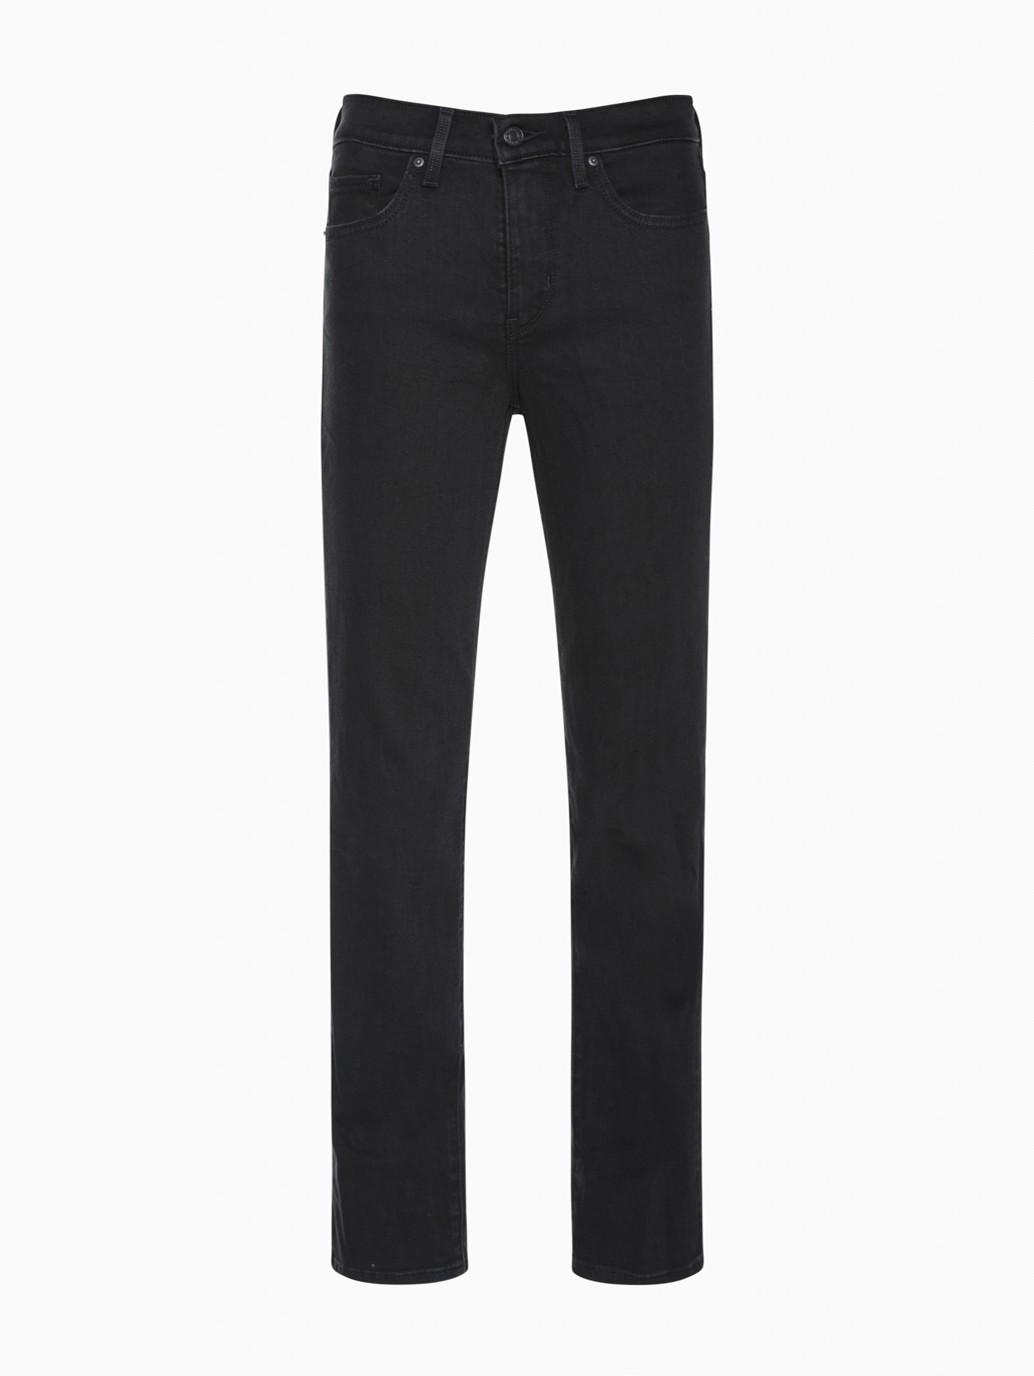 Buy Levi's® 314 Shaping Straight Jeans | Levi’s® Official Online Store SG